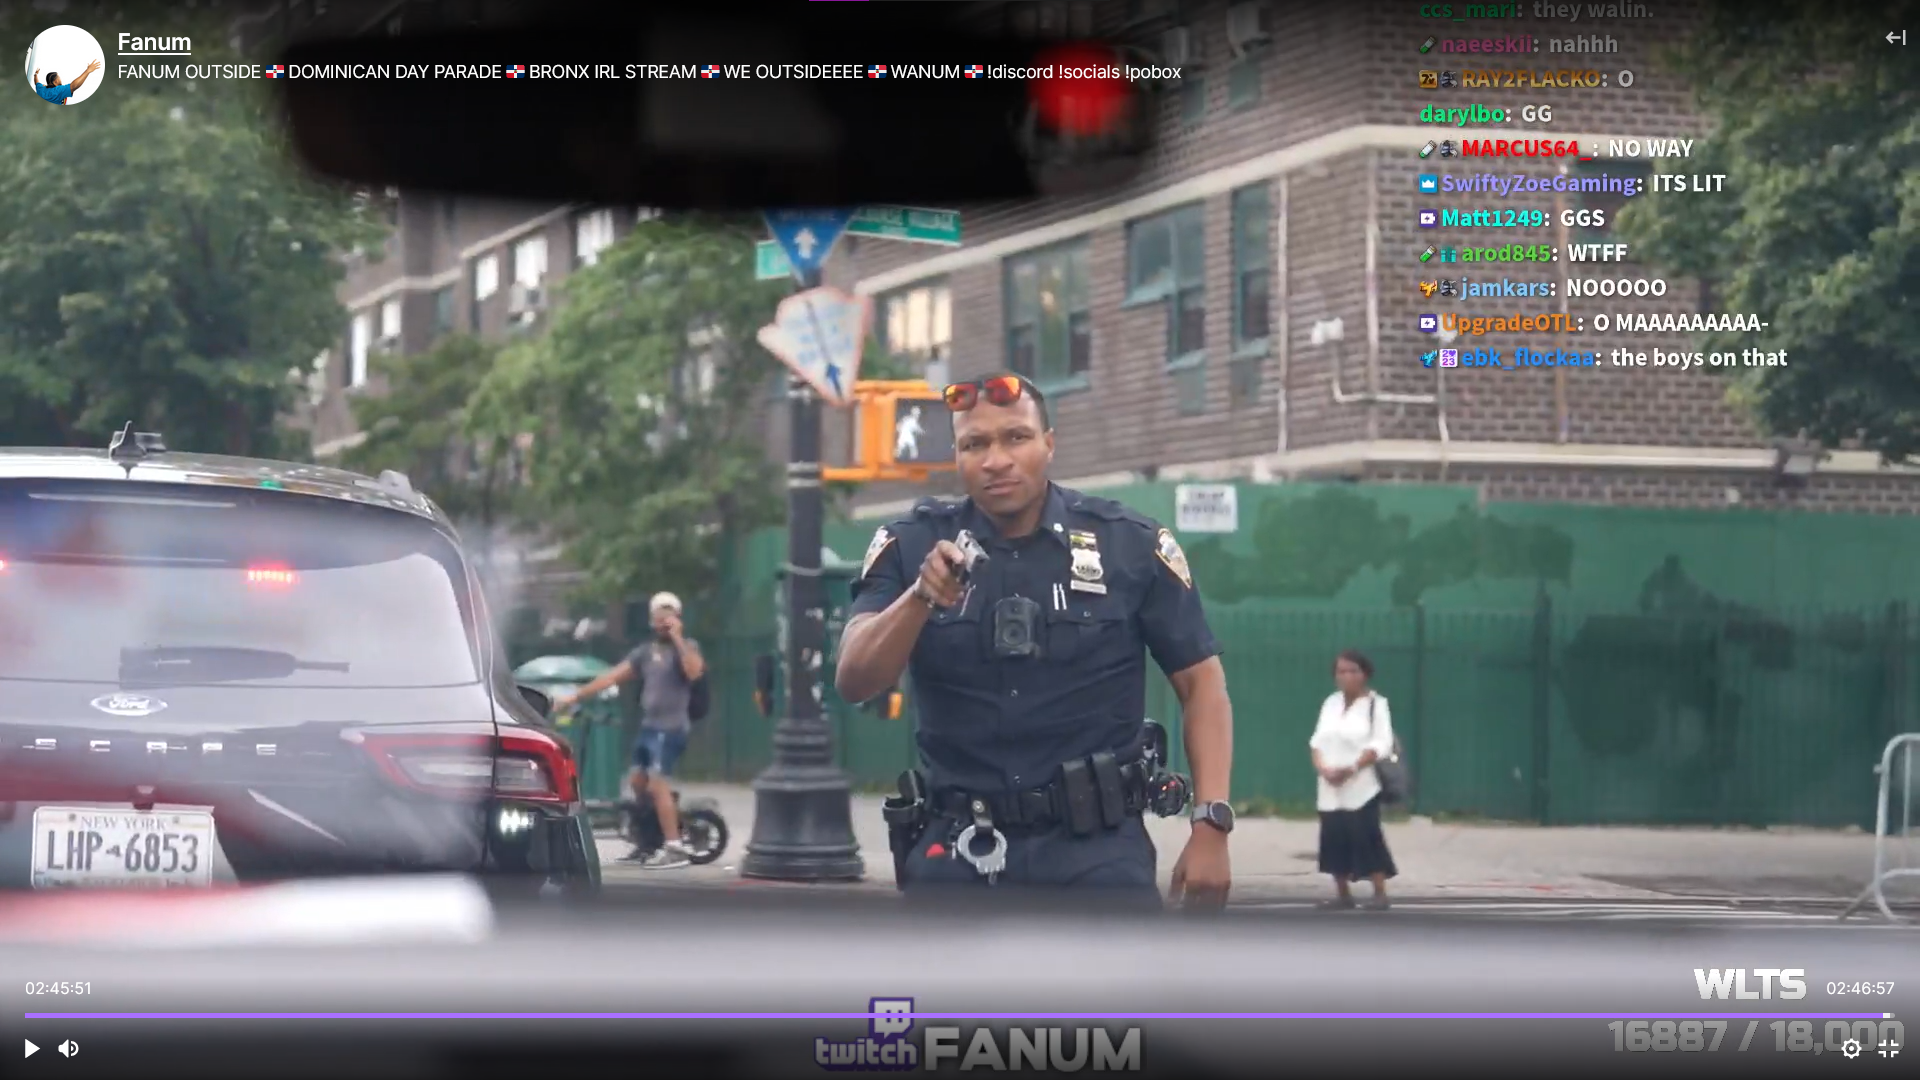 Screenshot of a police officer approaching Fanum's car from his livestream.